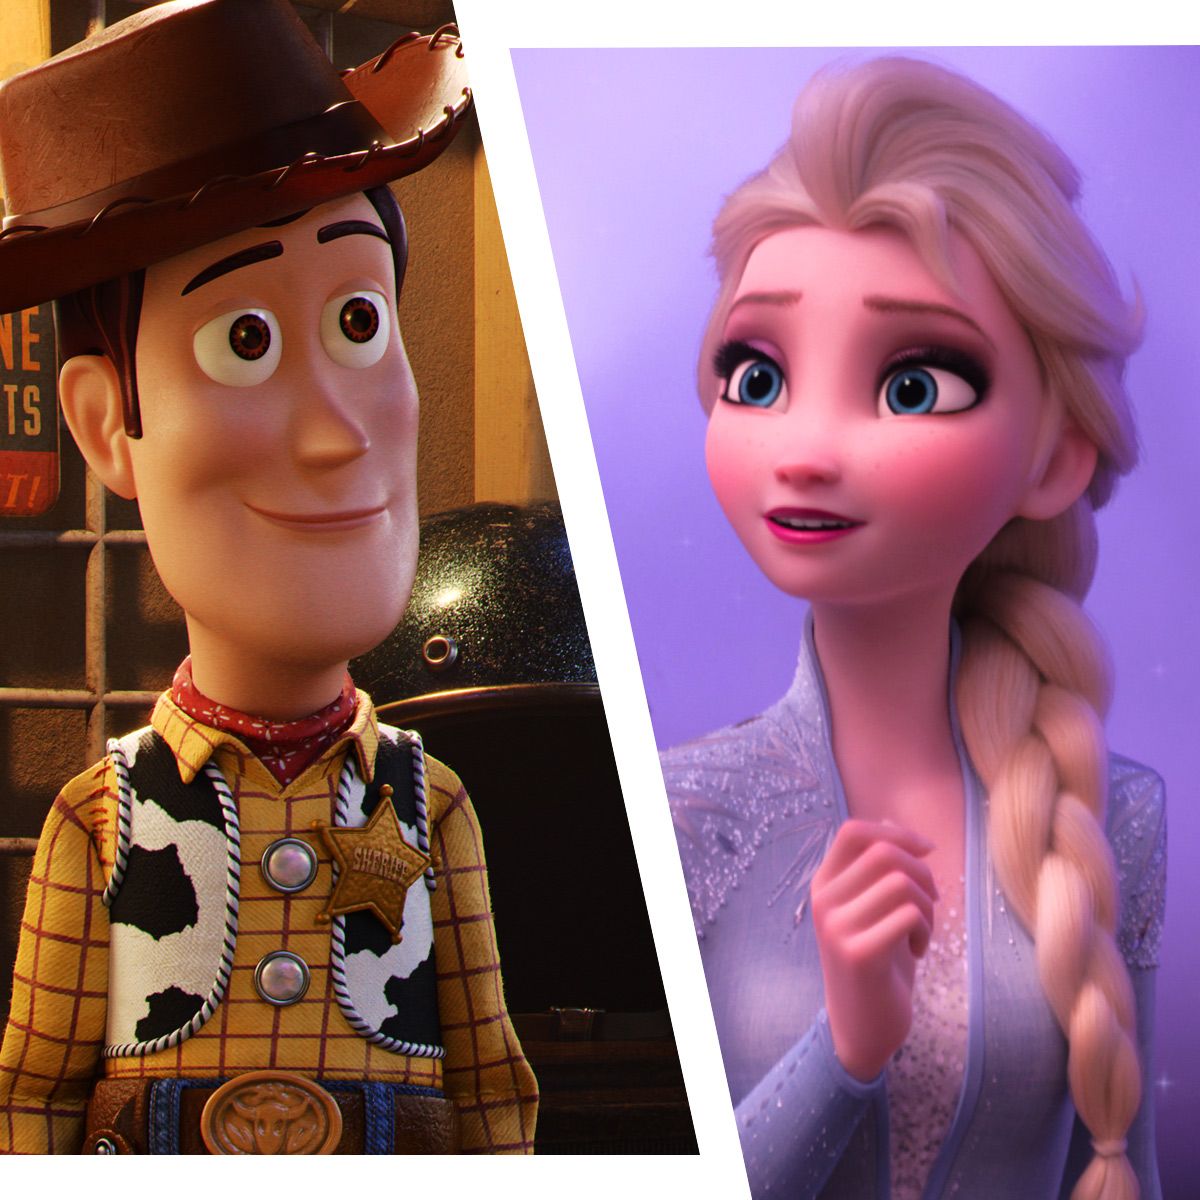 Frozen 3', 'Toy Story 5' and 'Zootopia 2' have been confirmed by